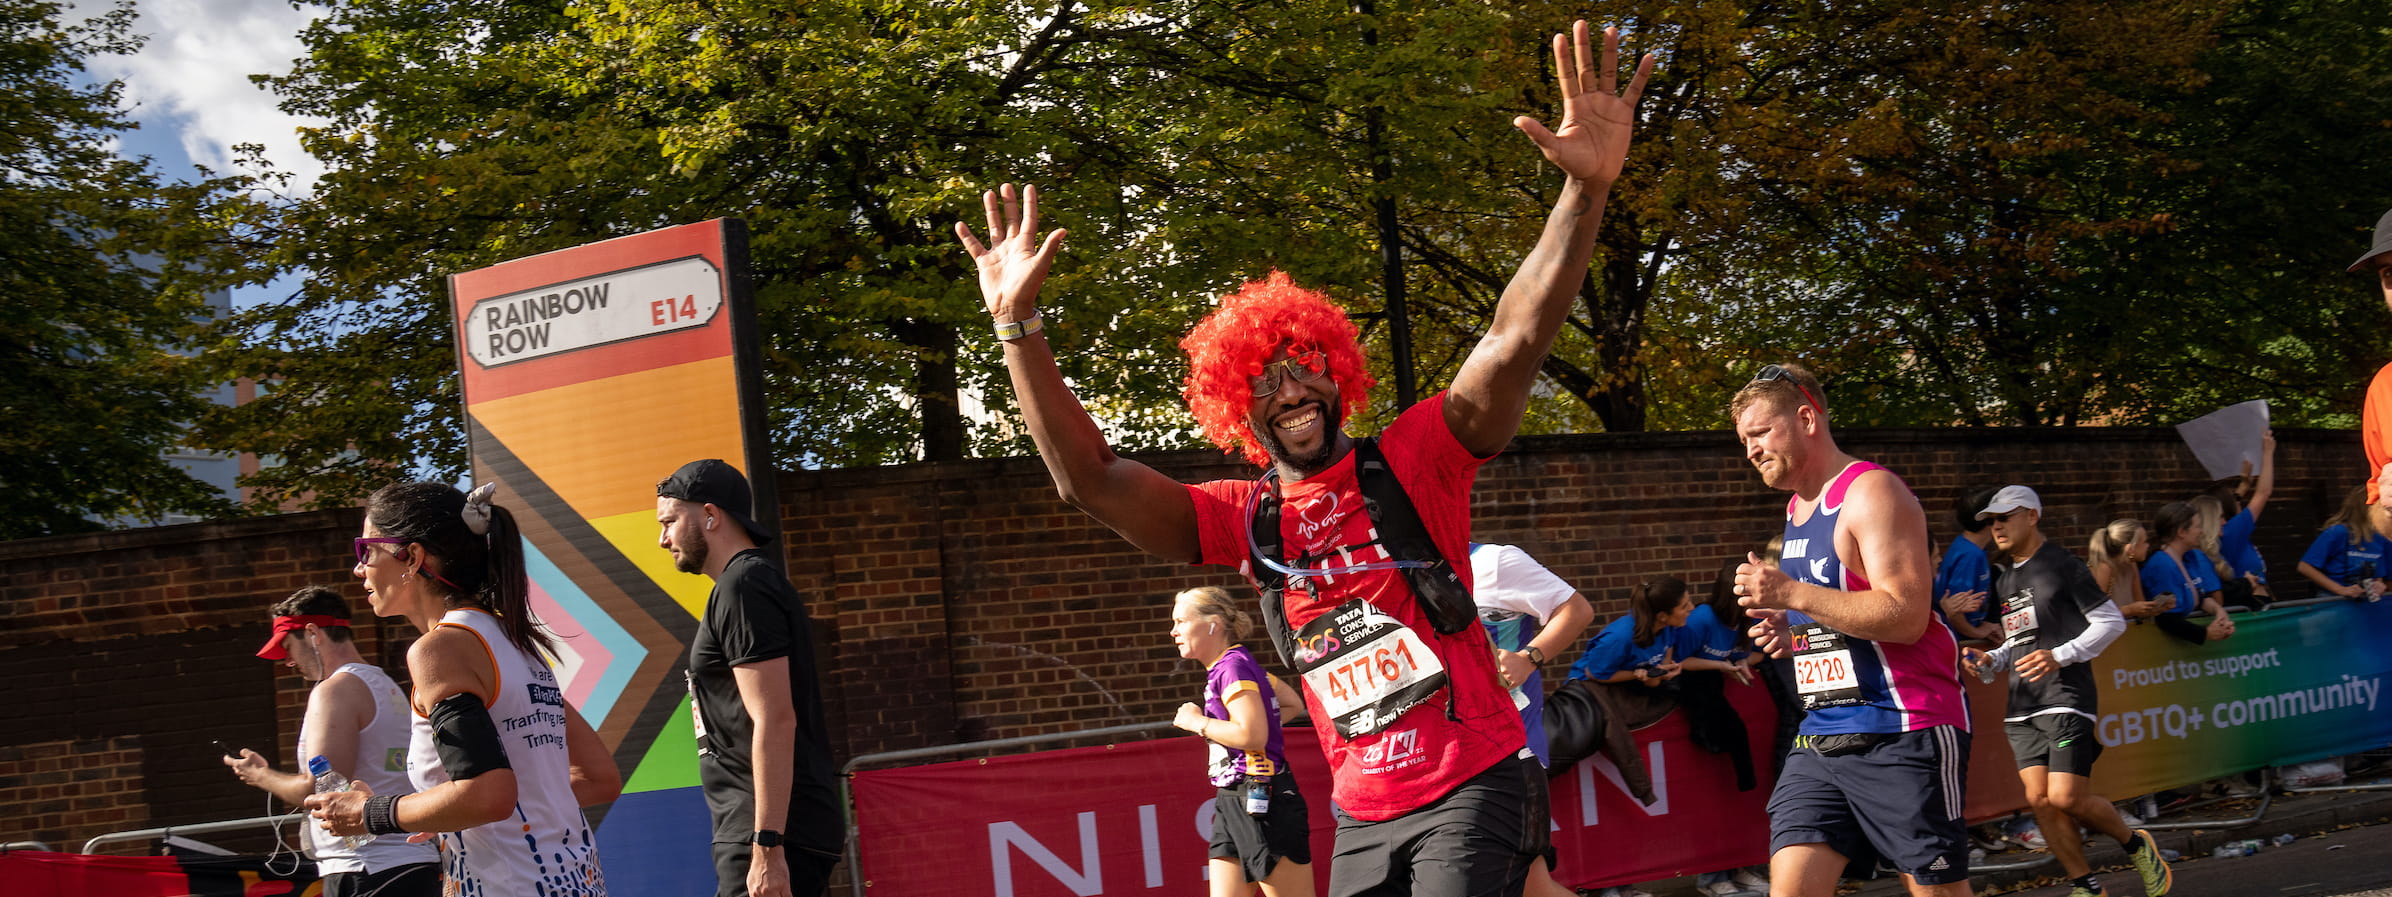 A TCS London Marathon participant with their hands in the air